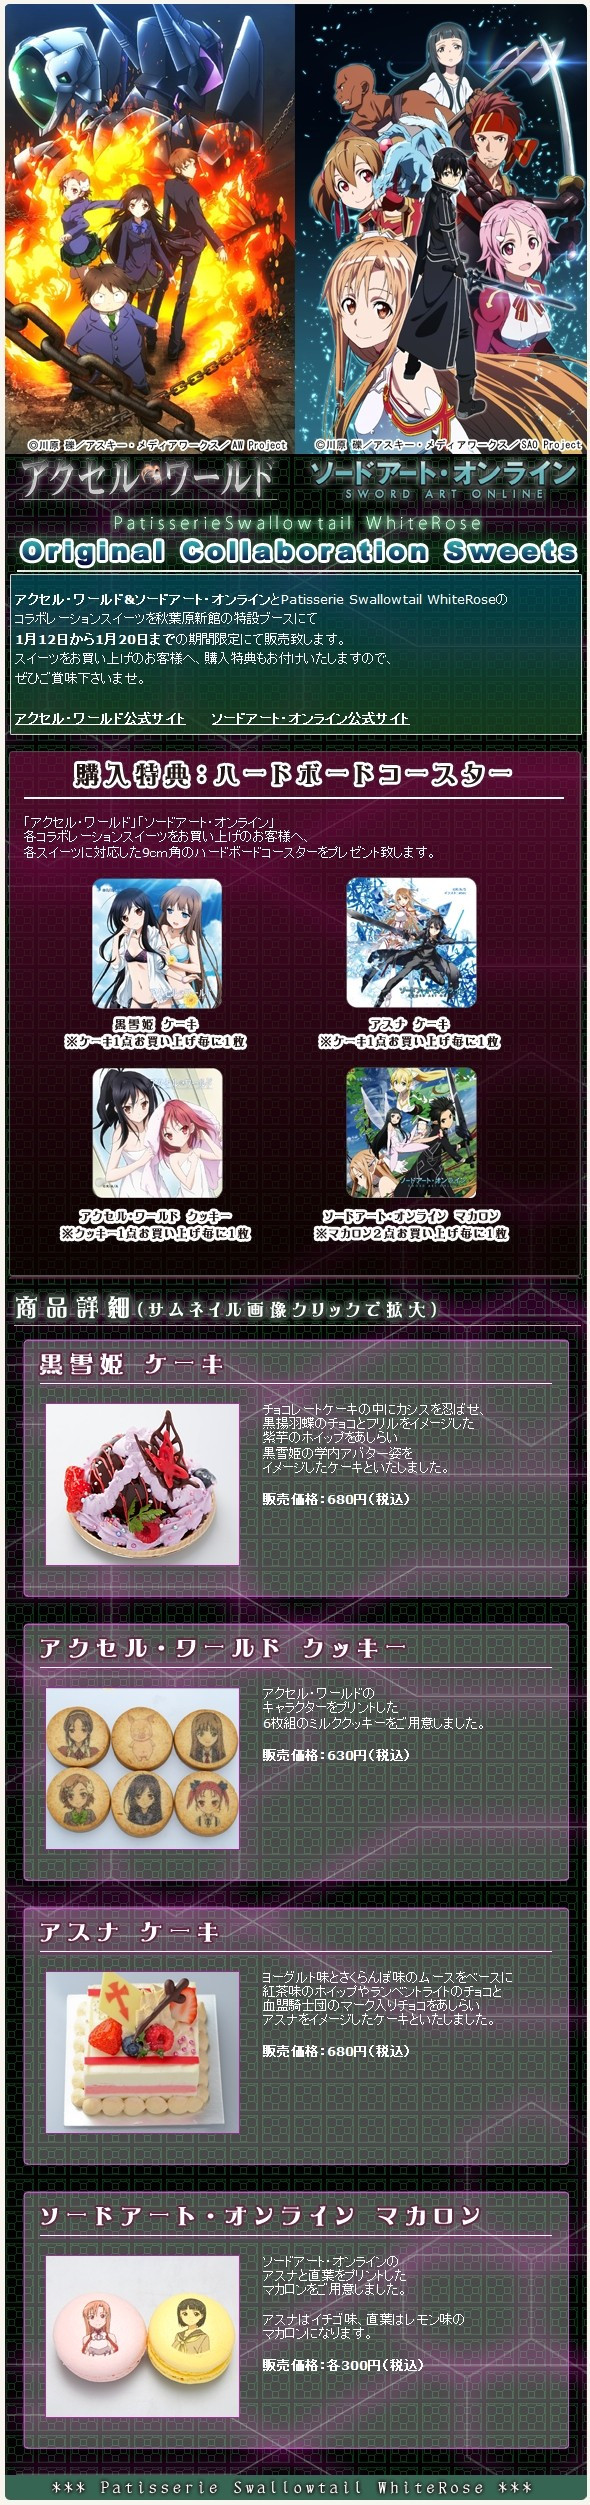 sword art online x accel world sweets collaboration